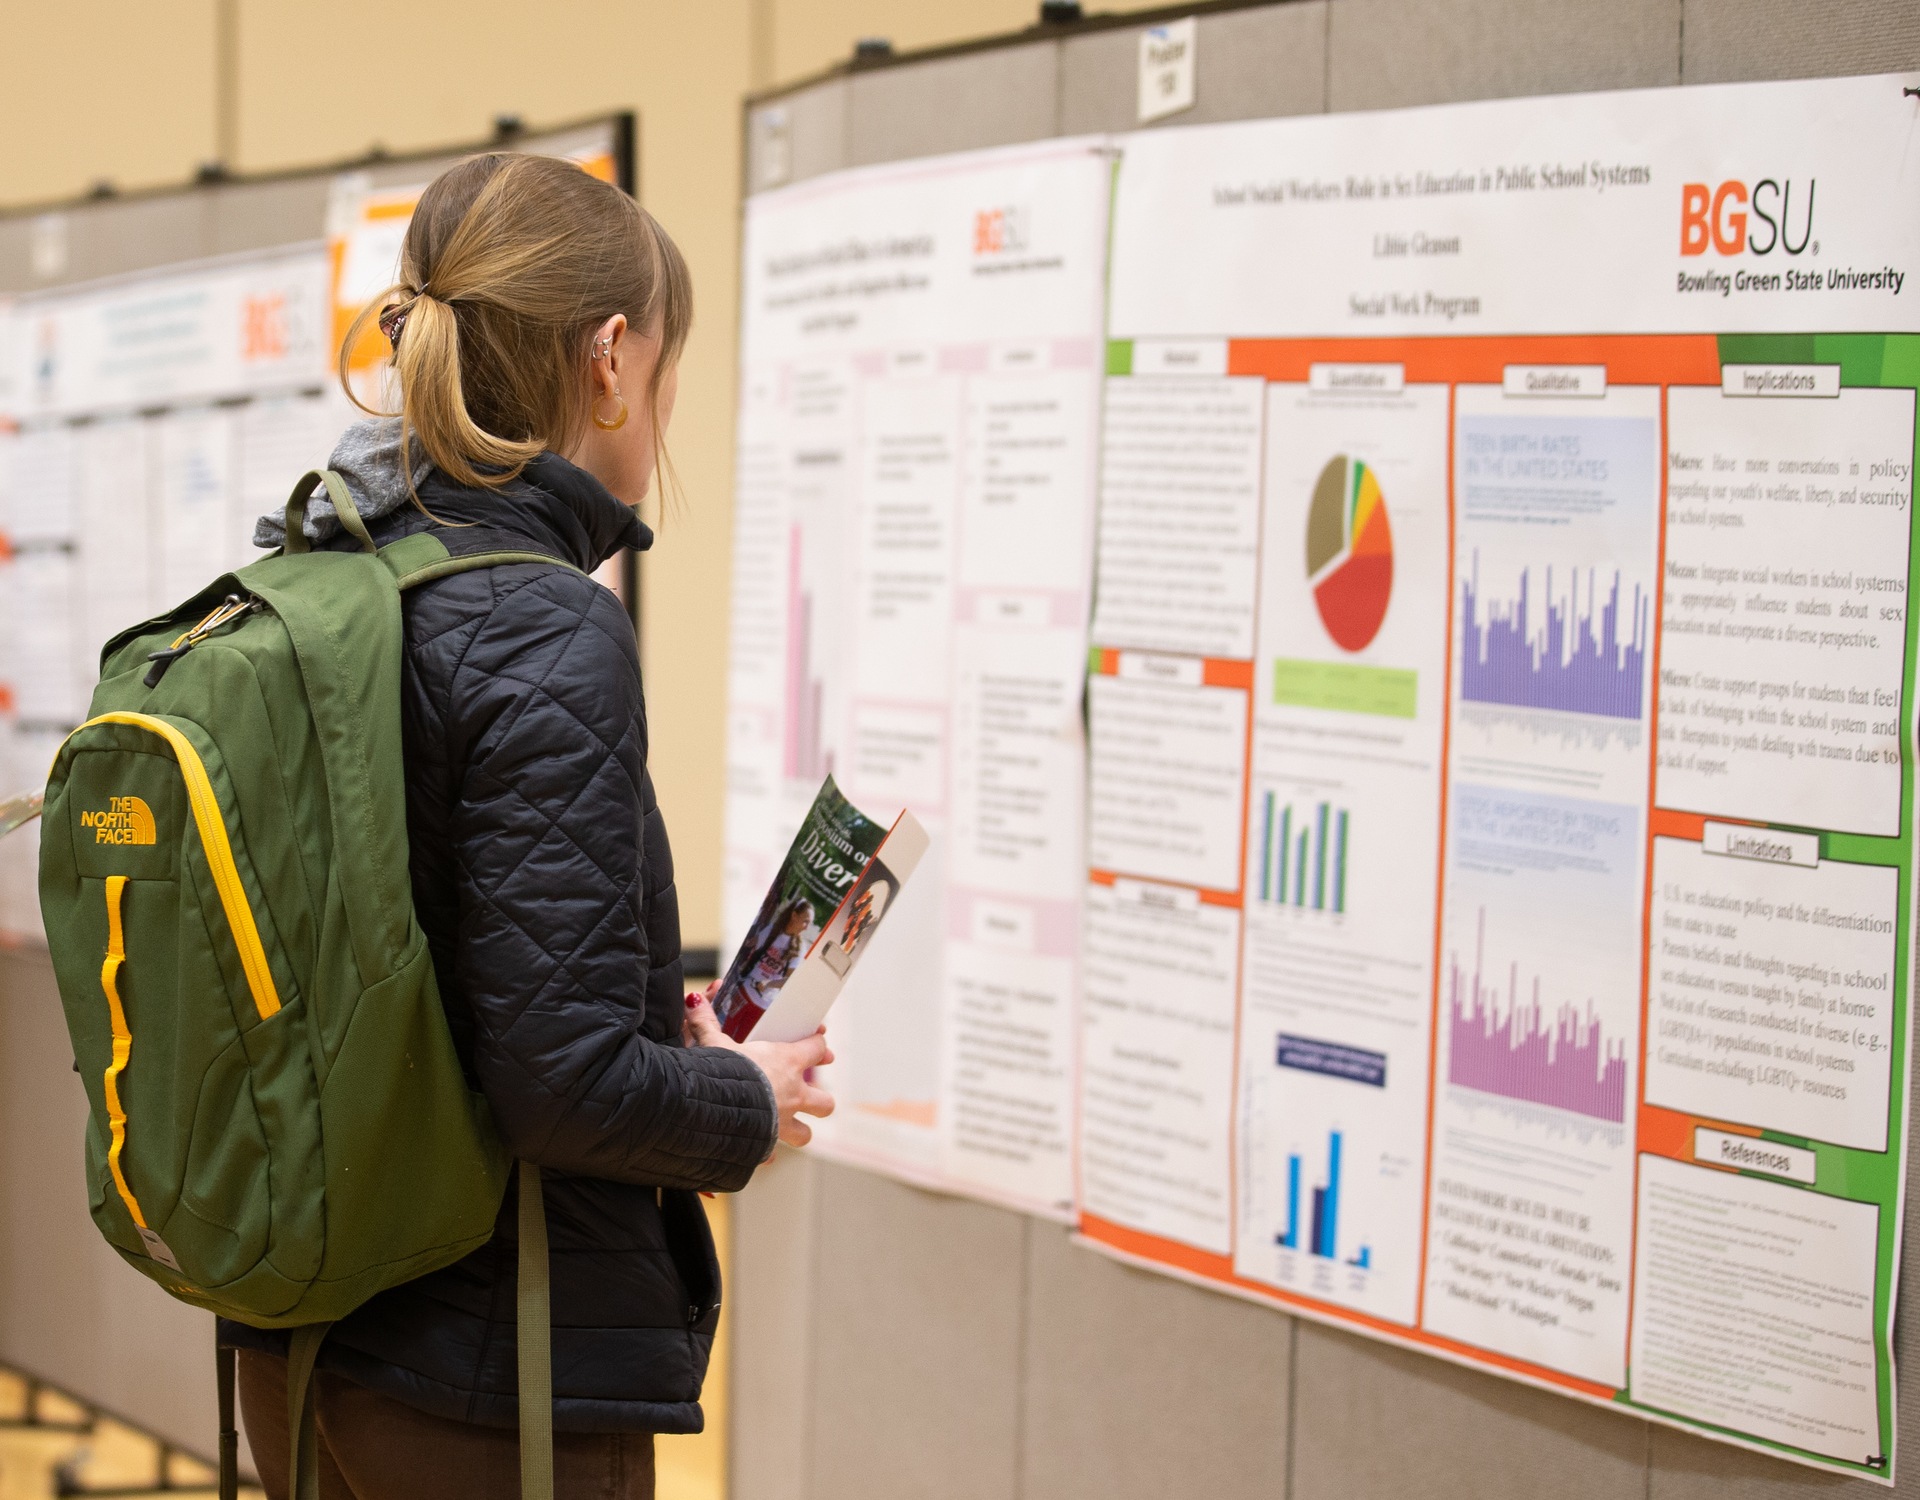 A BGSU student views a poster display at the Symposium on Diversity in the Bowen-Thompson Student Union Lenhart Grand Ballroom.